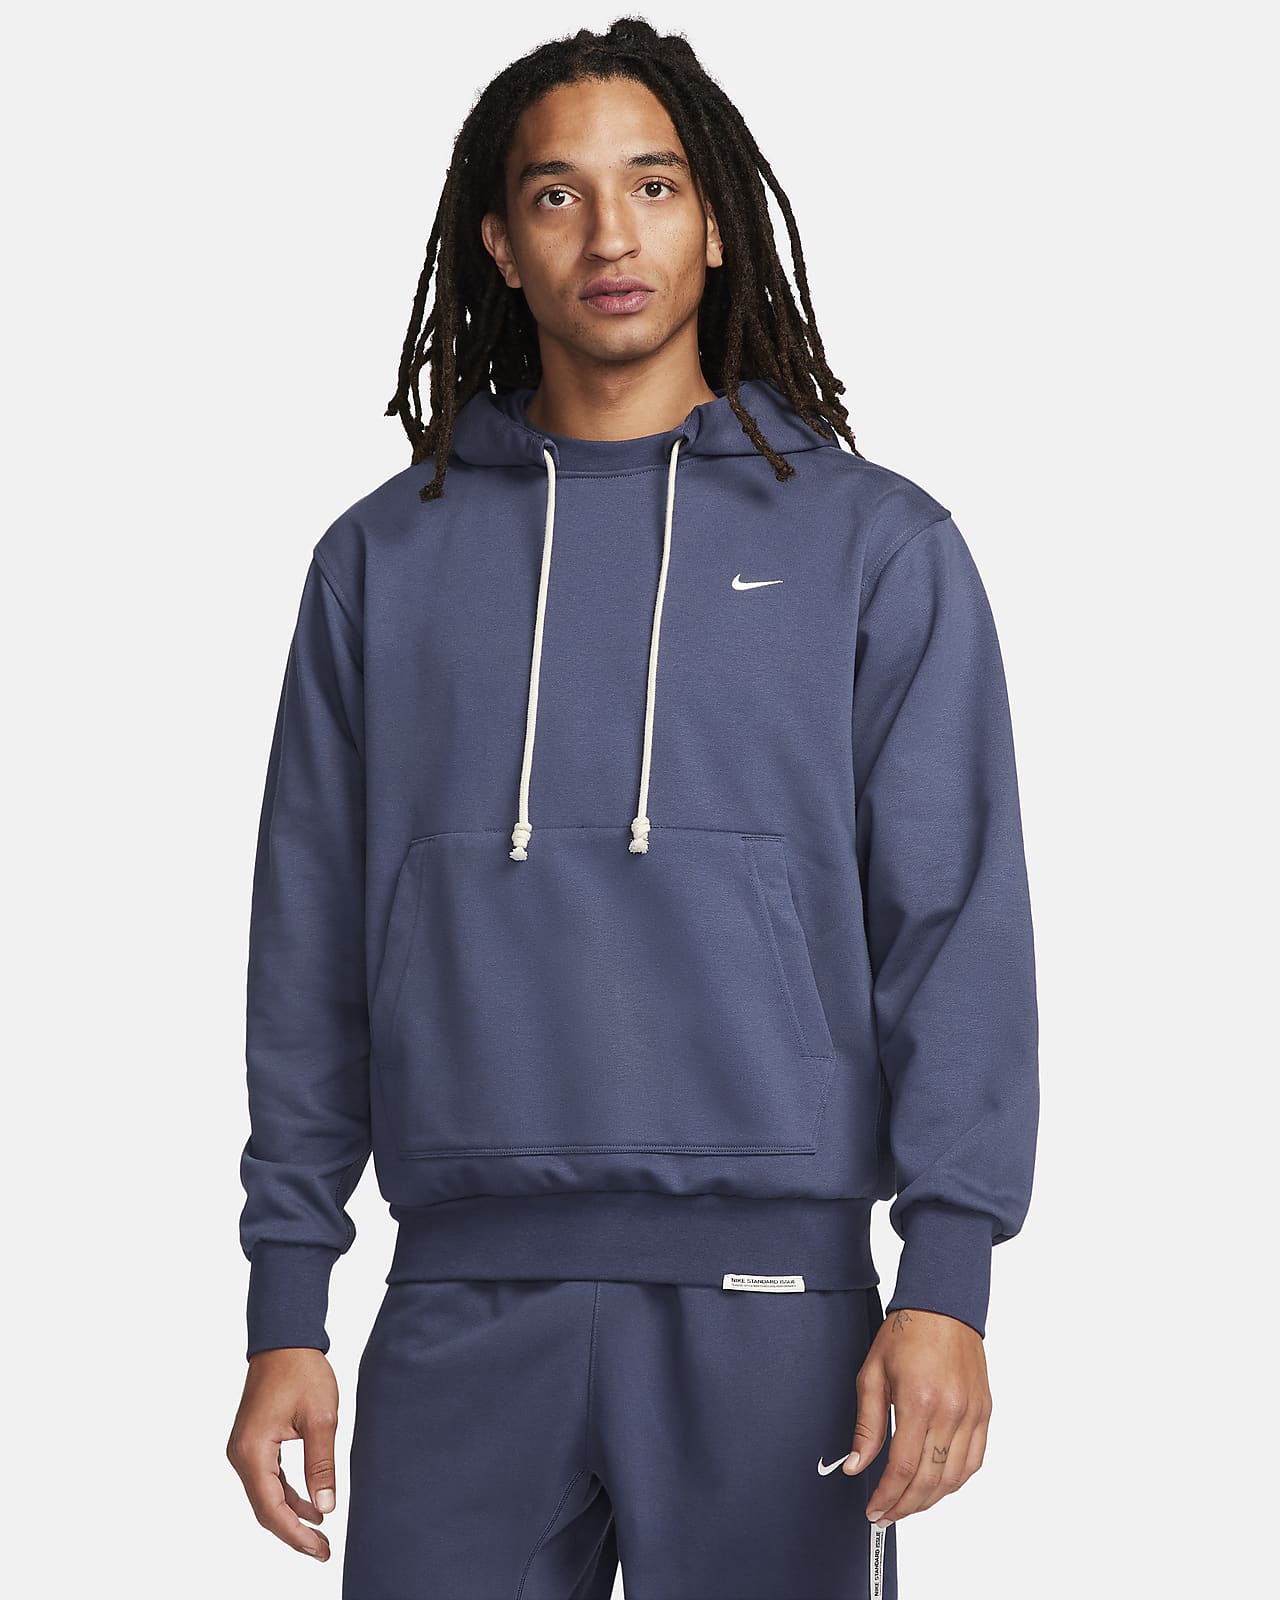 https://static.nike.com/a/images/t_PDP_1280_v1/f_auto,q_auto:eco/19a60e18-f5a0-4664-a968-a99078bb6b0d/standard-issue-mens-dri-fit-pullover-basketball-hoodie-vgb6ww.png